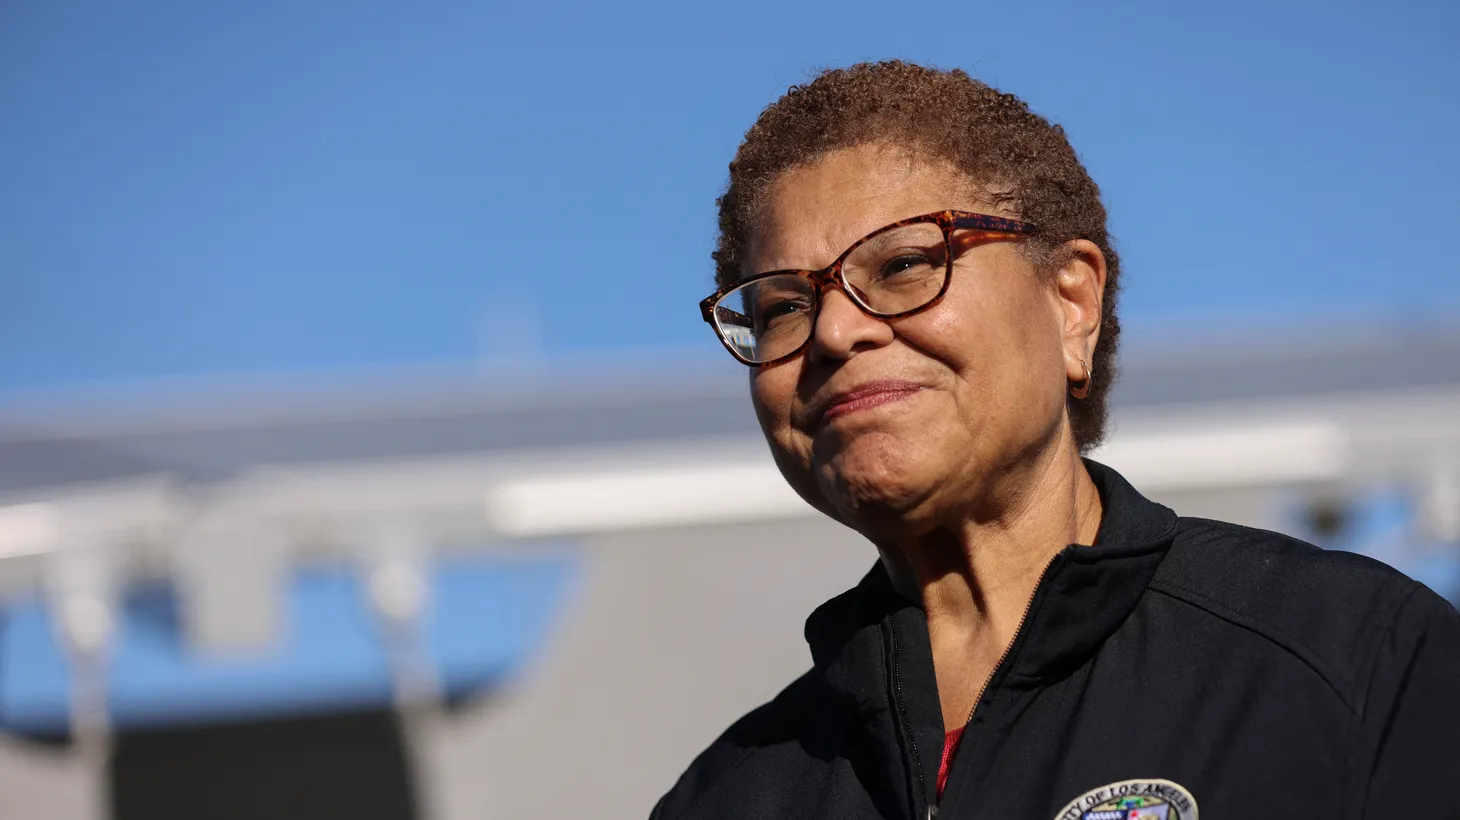 Los Angeles Mayor Karen Bass looks on during a visit to the Hilda L. Solis Care First Village to see the interim housing built from shipping containers in Los Angeles, California, U.S., February 7, 2023.